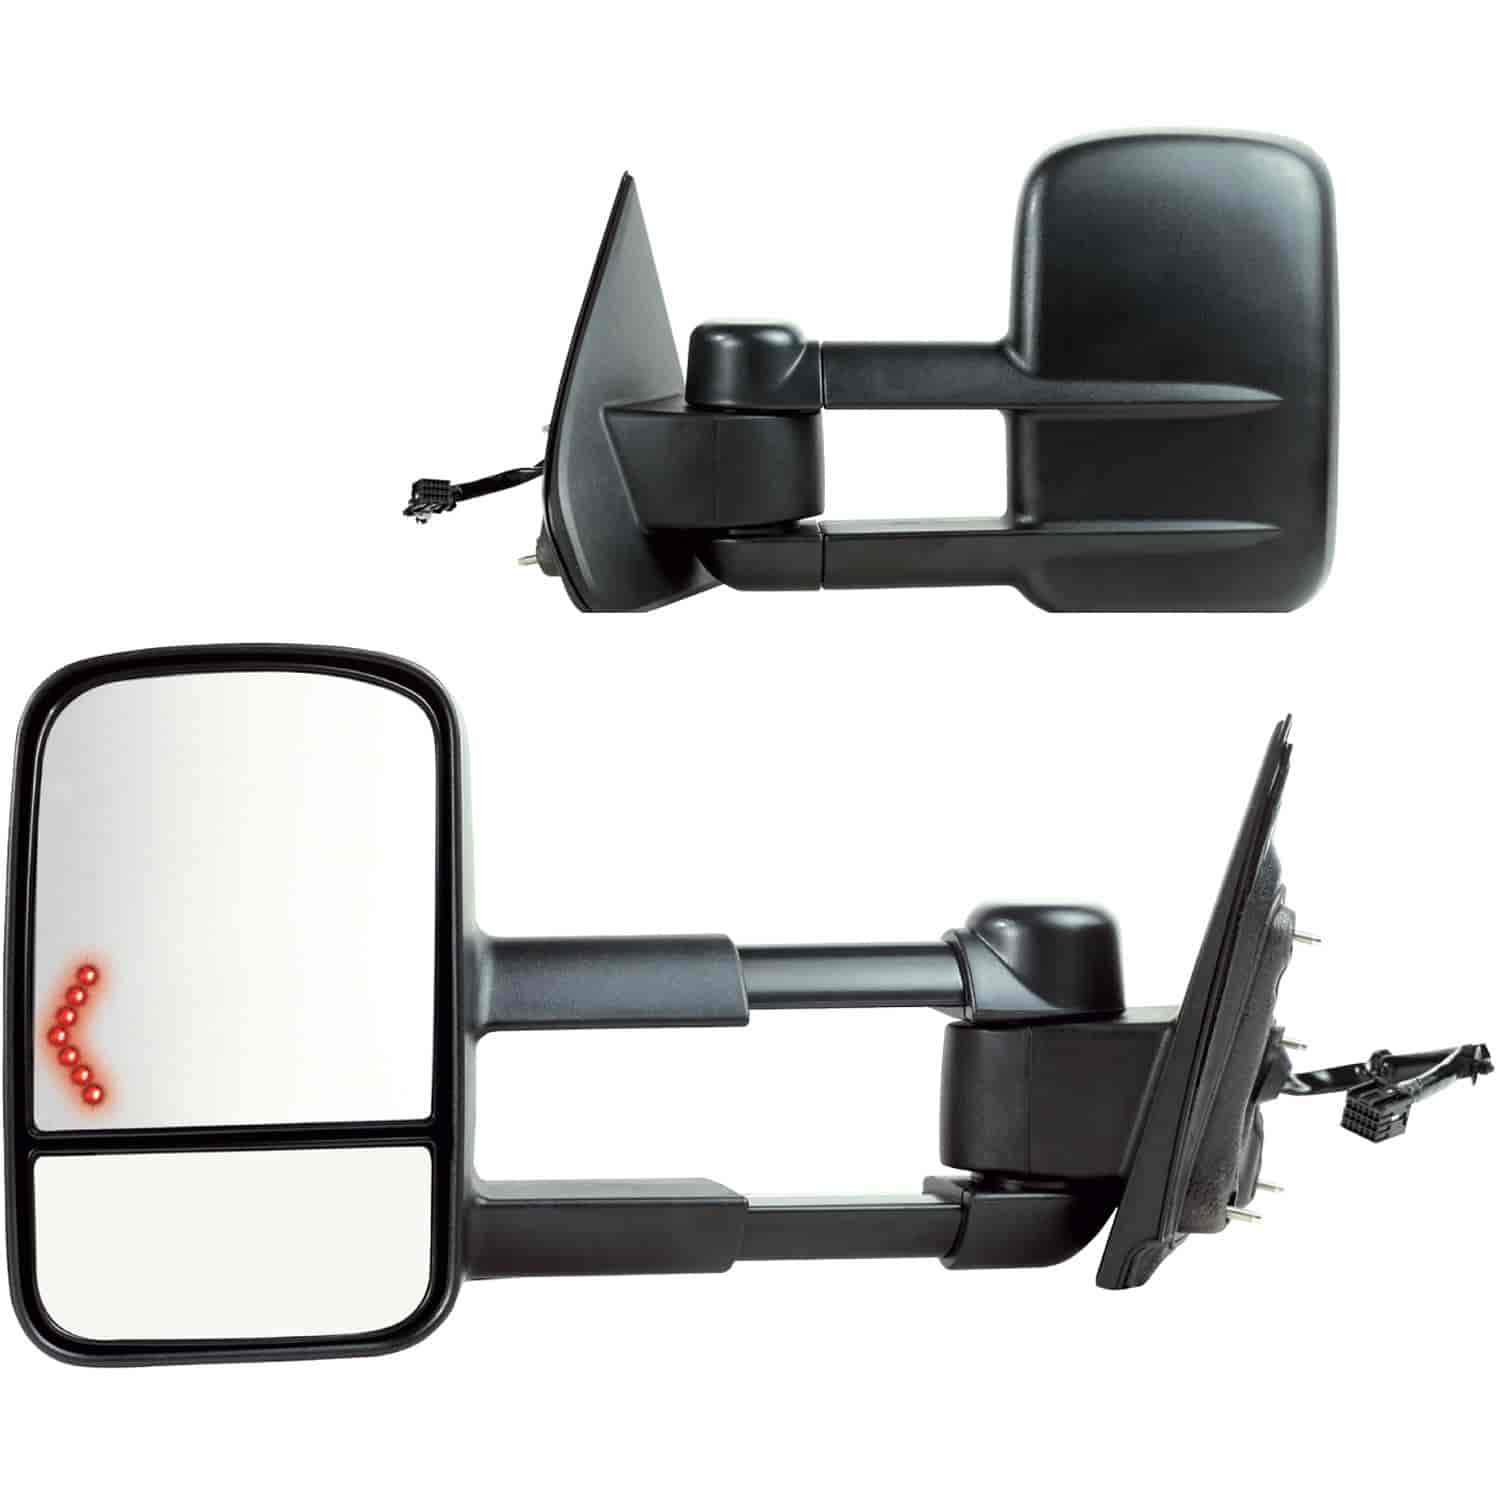 OEM Style Replacement mirror set for 2014 Chevrolet Silverado Pick-Up 1500/ GMC Sierra Pick-Up 1500